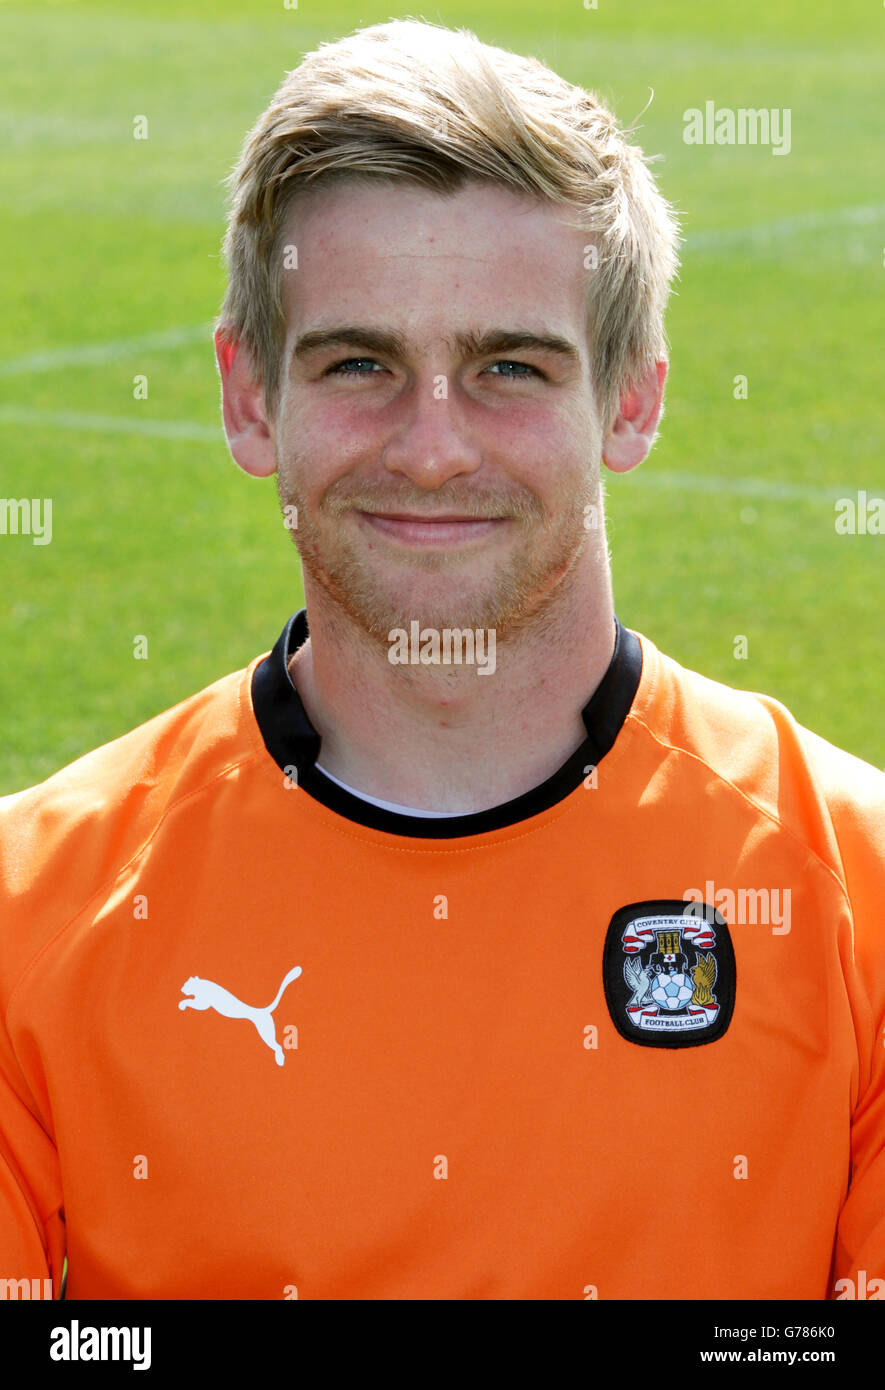 Soccer - Sky Bet League One - Coventry City Photocall 2014/15 - Ryton Training Ground. Coventry City goalkeeper Lee Burge Stock Photo